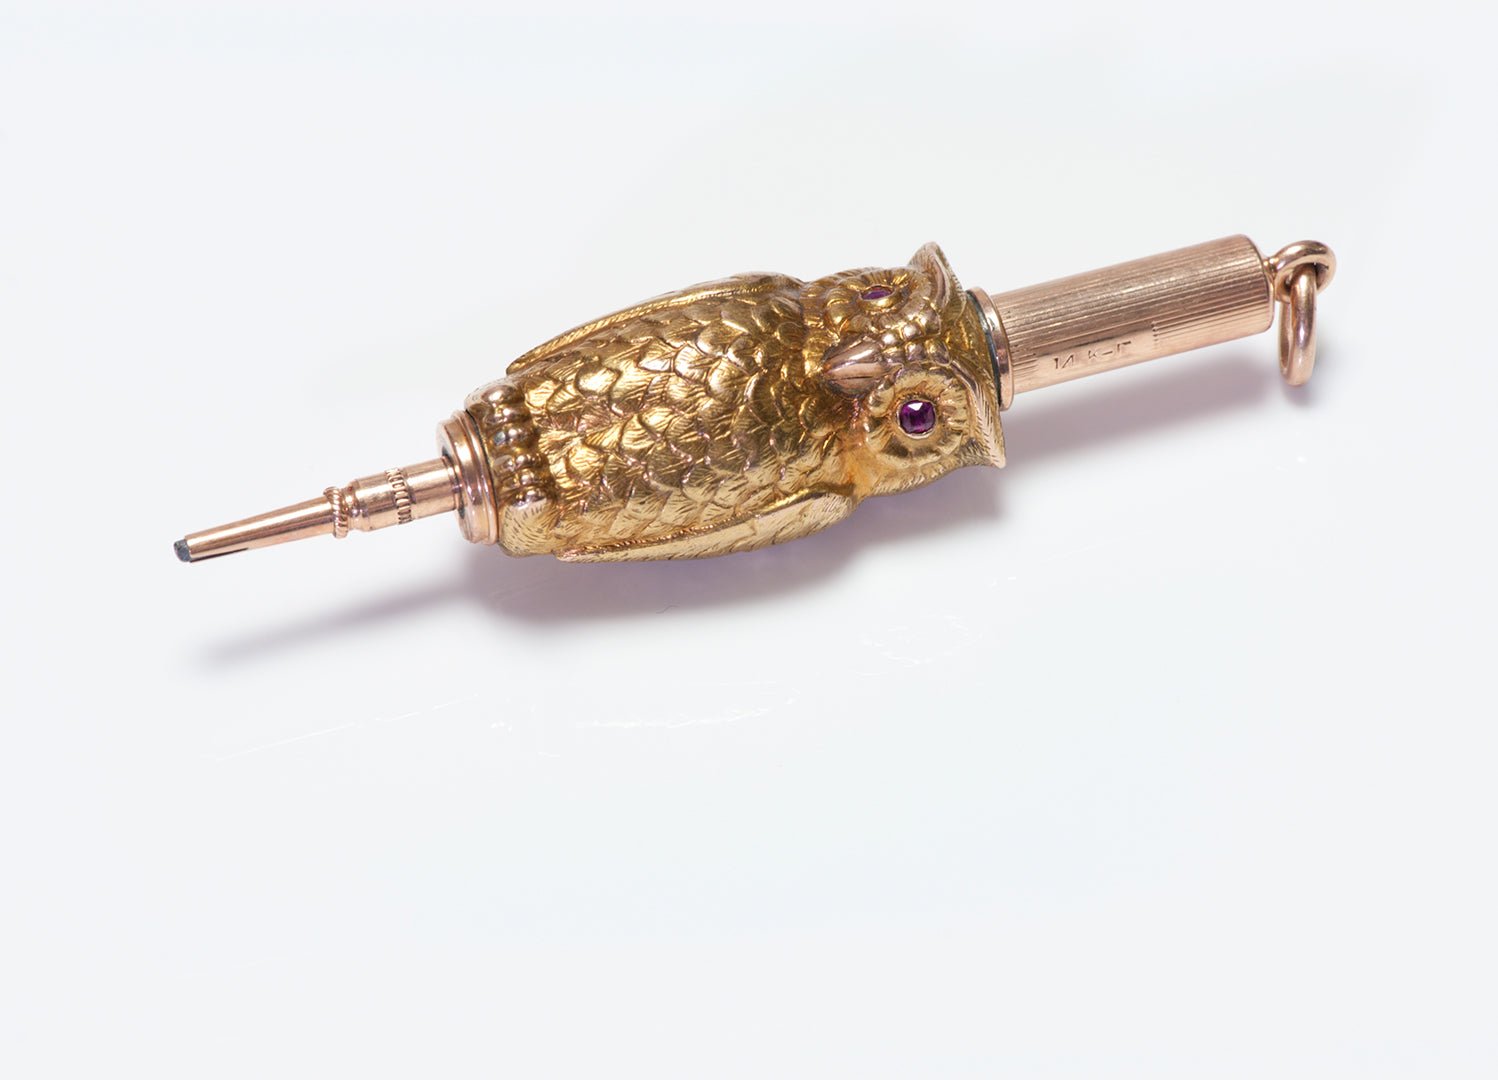 Antique Gold & Ruby Owl Fob Pencil - DSF Antique Jewelry